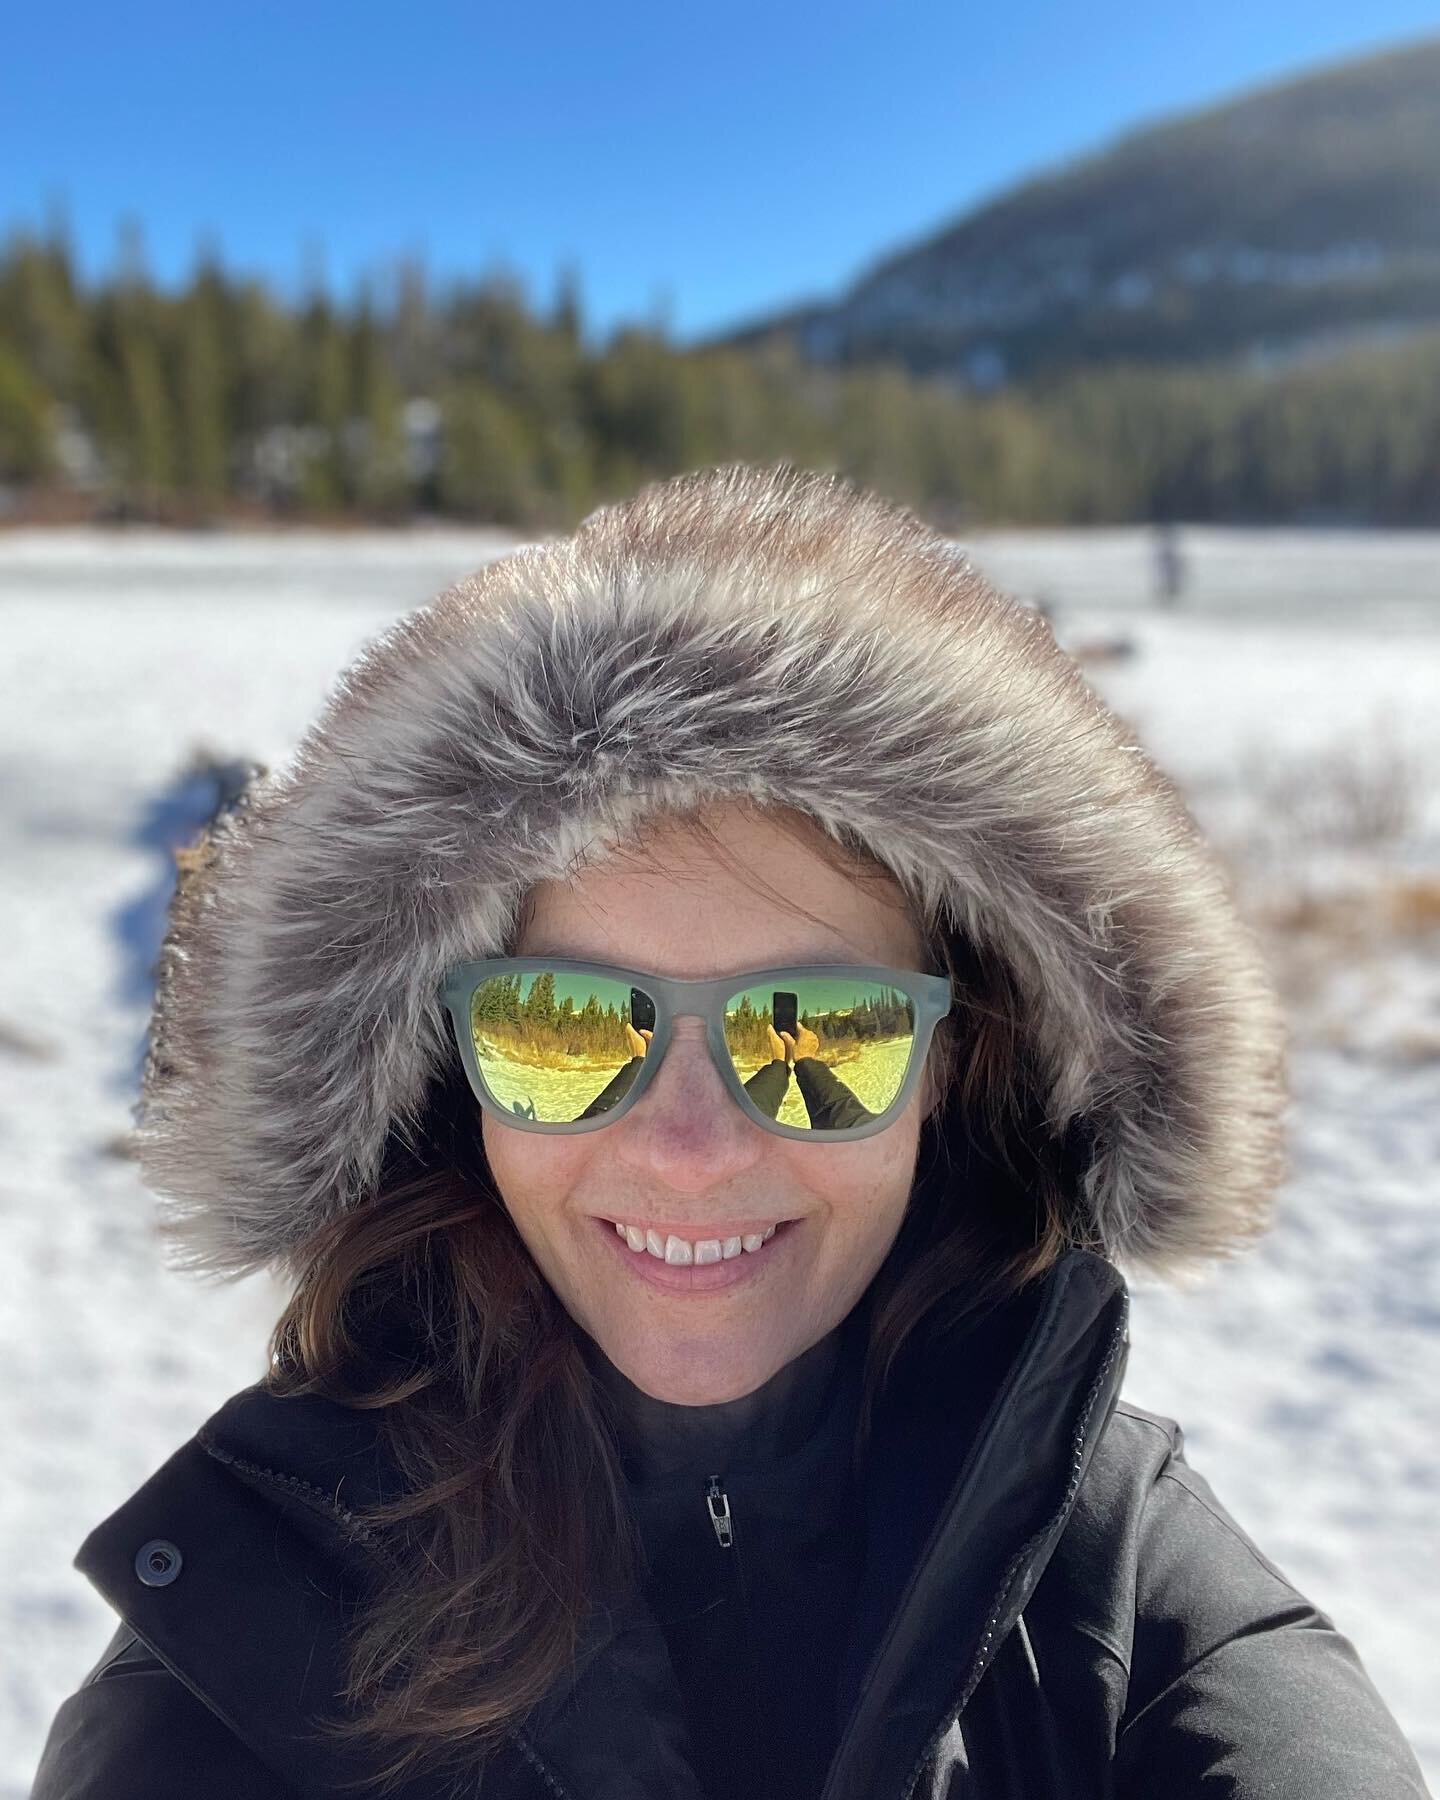 Mental health day, Colorado style. 
😊
😊
😊
Heck of a shoulder season with the trail mostly snow packed (yes to micro spikes!) but also dry and rocky and icy in patches. #coloradohiking #60hikeswithin60milesdenver #lostlake #snowytrail #exploremore 